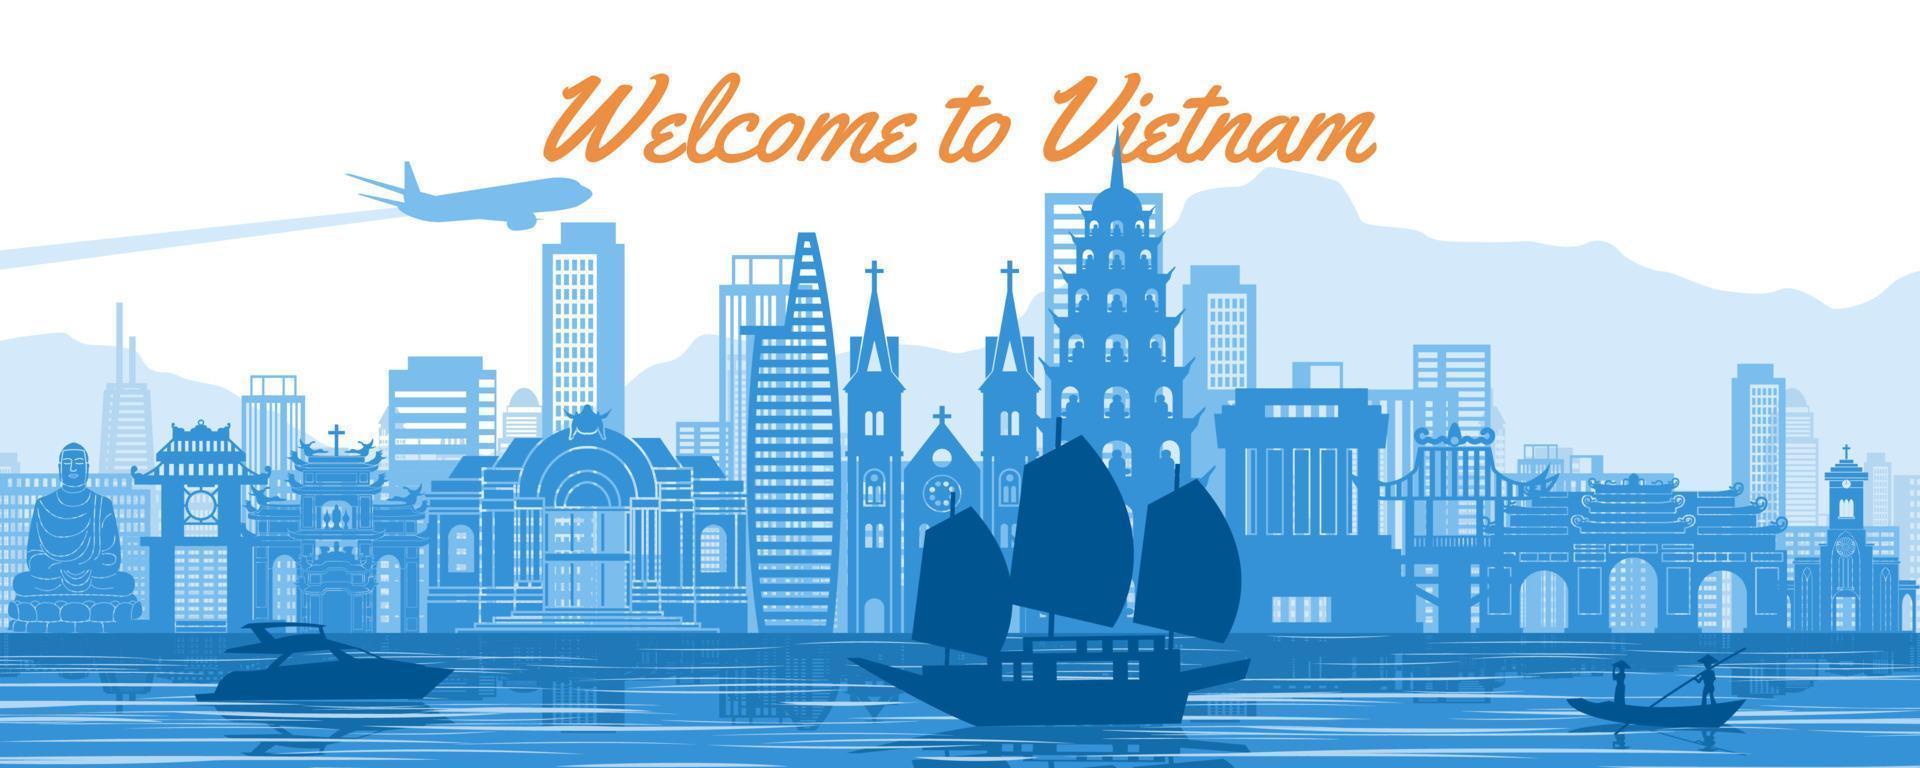 Vietnam famous landmarks silhouette style with blue and white color vector